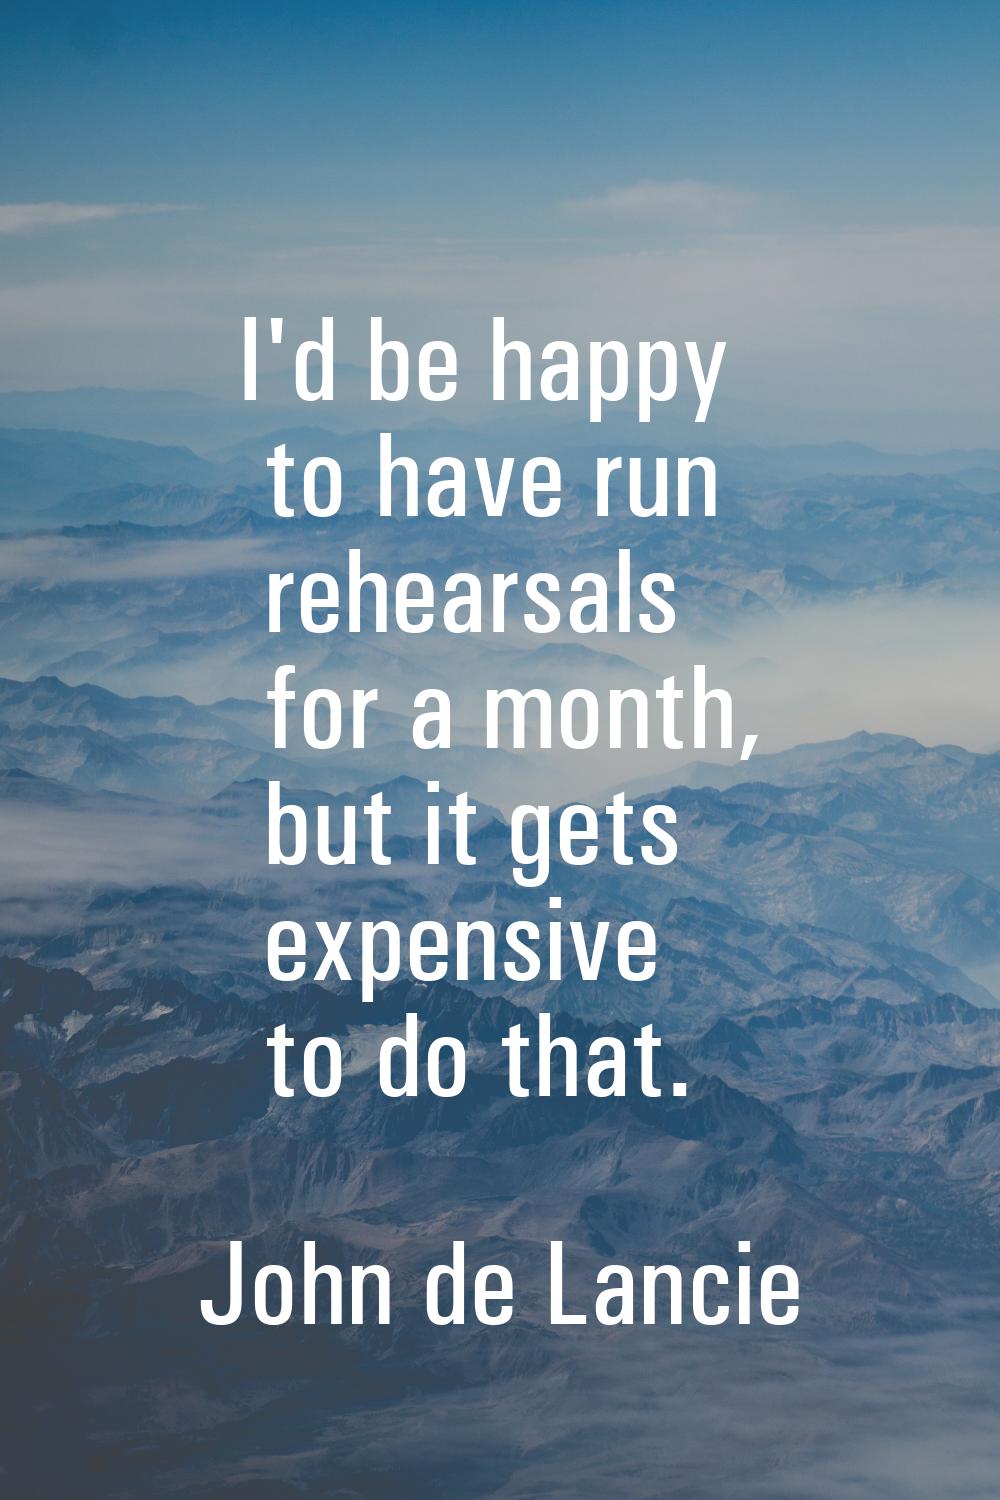 I'd be happy to have run rehearsals for a month, but it gets expensive to do that.